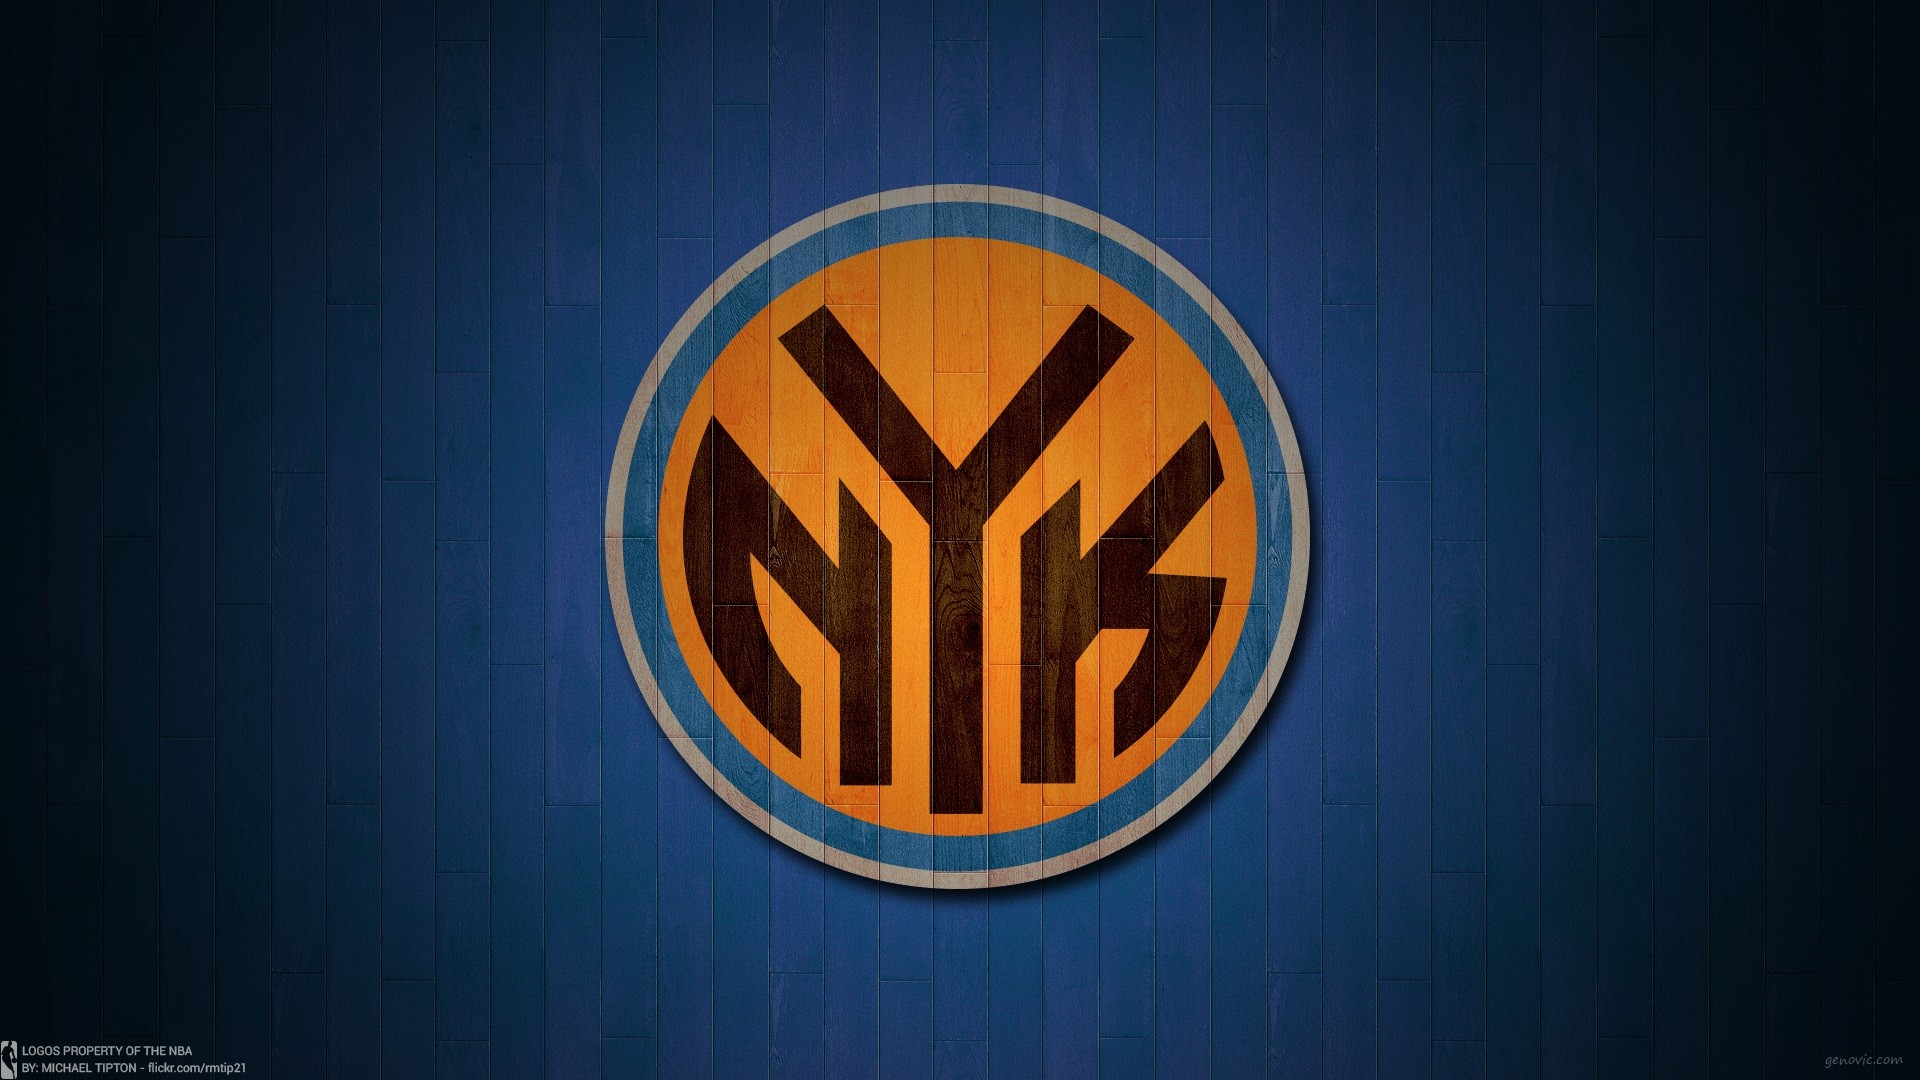 New York Knicks For Desktop Wallpaper with image dimensions 1920x1080 pixel. You can make this wallpaper for your Desktop Computer Backgrounds, Windows or Mac Screensavers, iPhone Lock screen, Tablet or Android and another Mobile Phone device